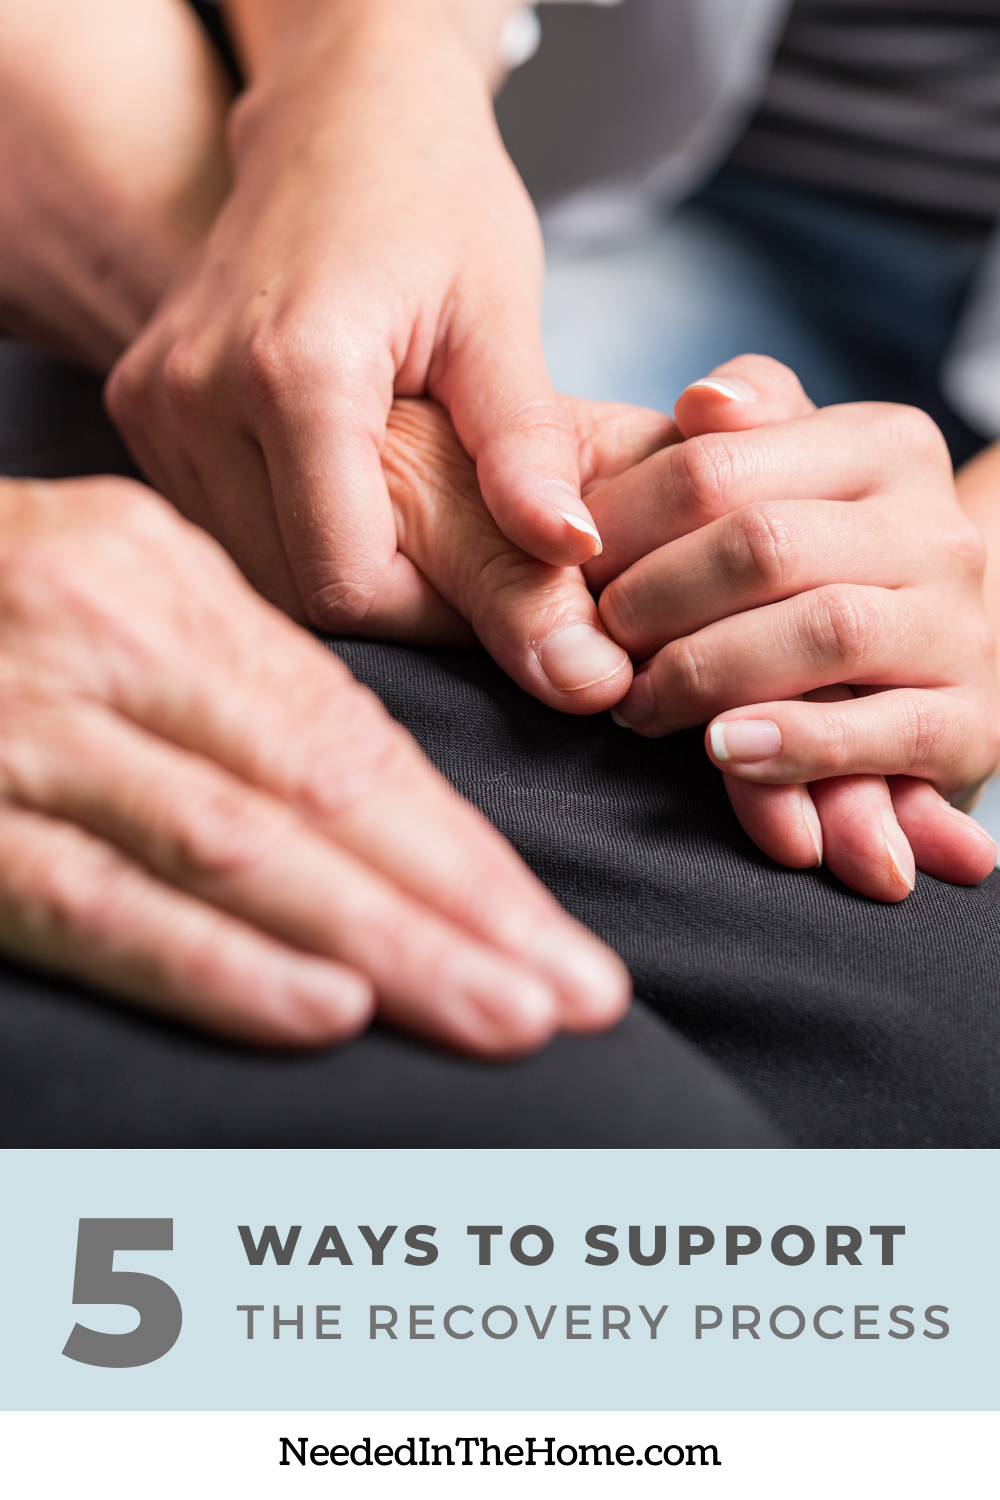 pinterest-pin-description 5 ways to support the recovery process holding hands neededinthehome